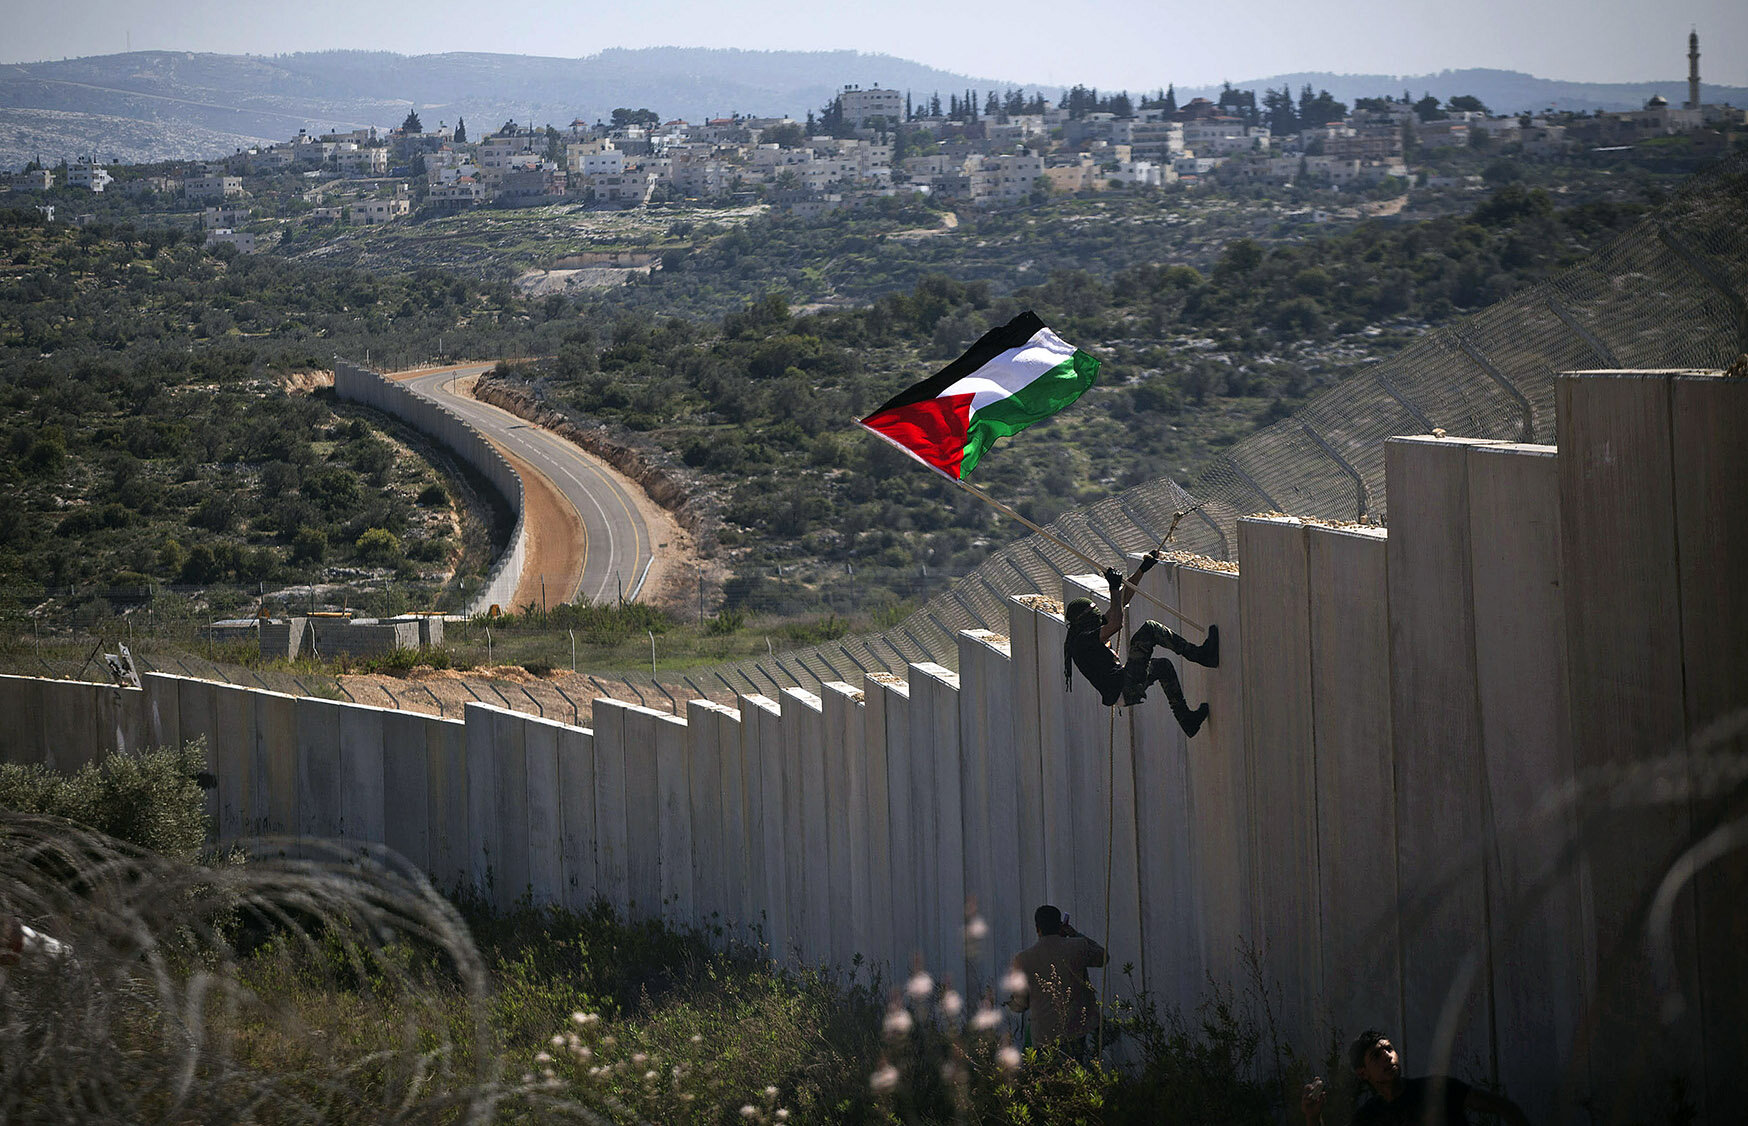 The Israel separation wall at Bil'in, where a Palestinian protester plants a flag, the settlement of Modi'in Illit in the background (photo courtesy Oren Ziv, the  GroundTruth Project ).